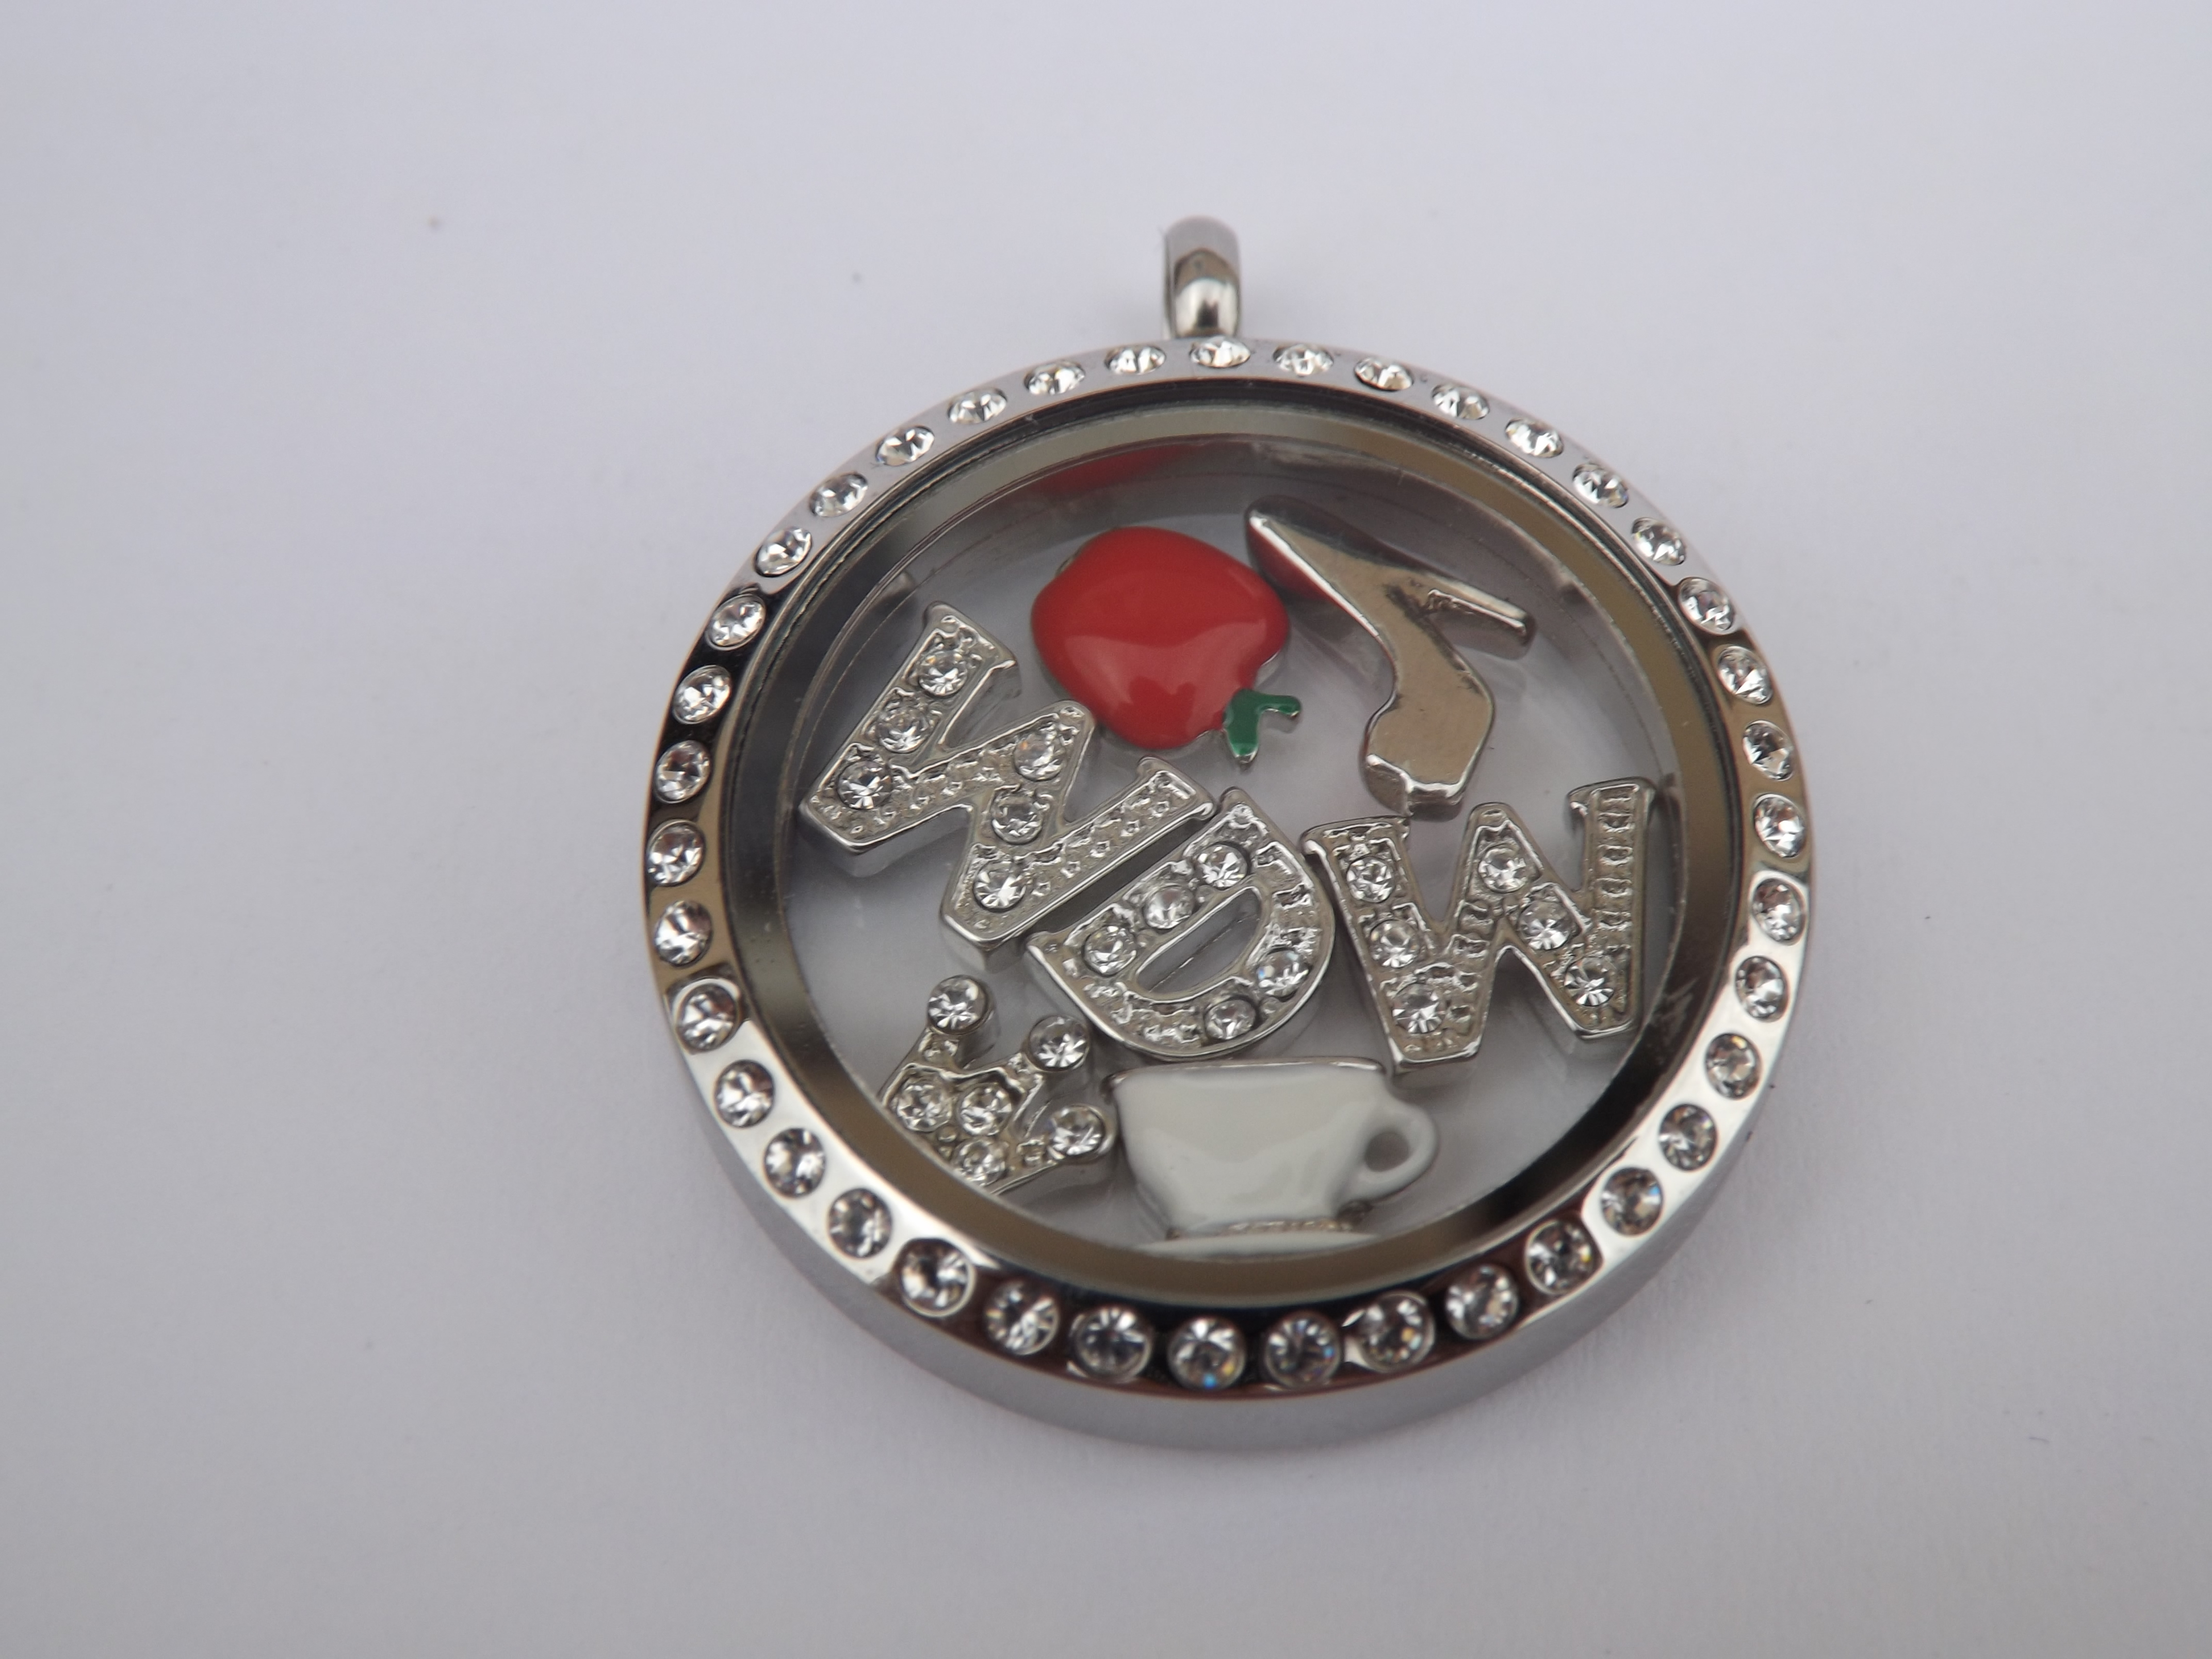 Disney Origami Owl Charms Giveaway 1 Reader Will Win A Customized Locket From Origami Owl